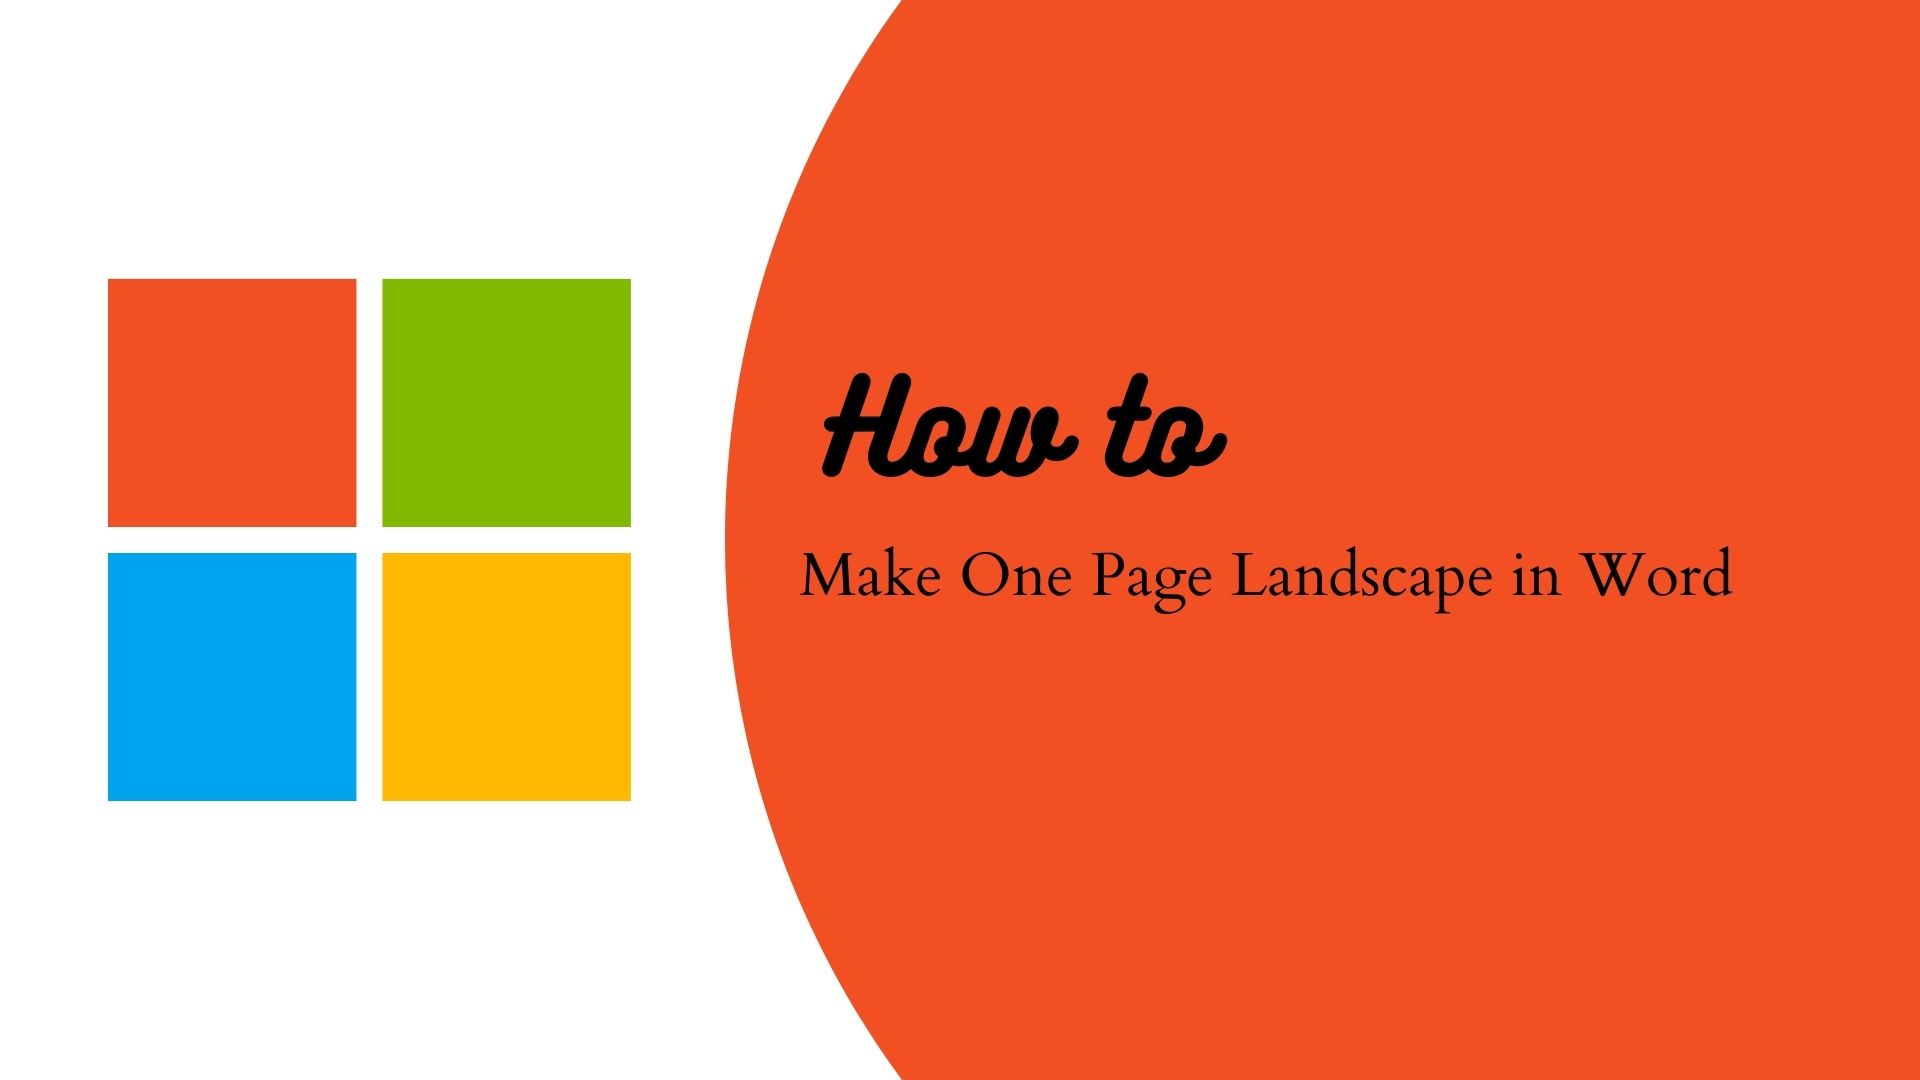 How to Make One Page Landscape in Word